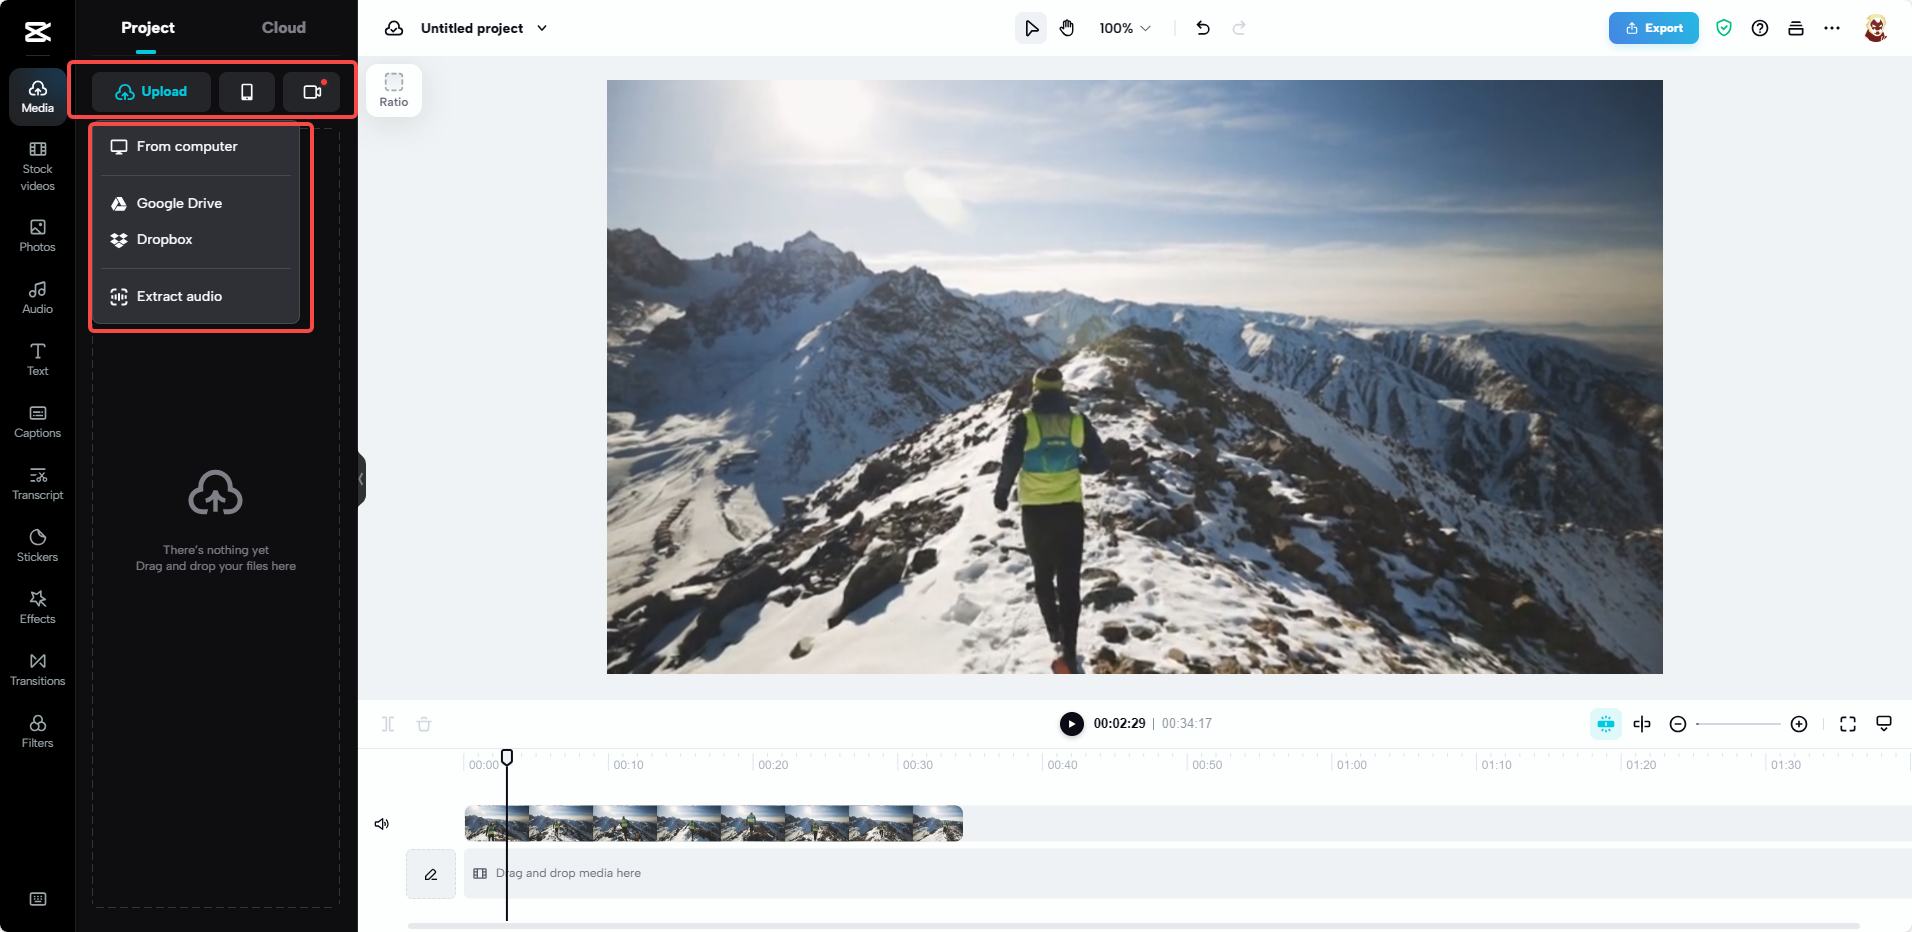 Upload videos to CapCut's online video editor